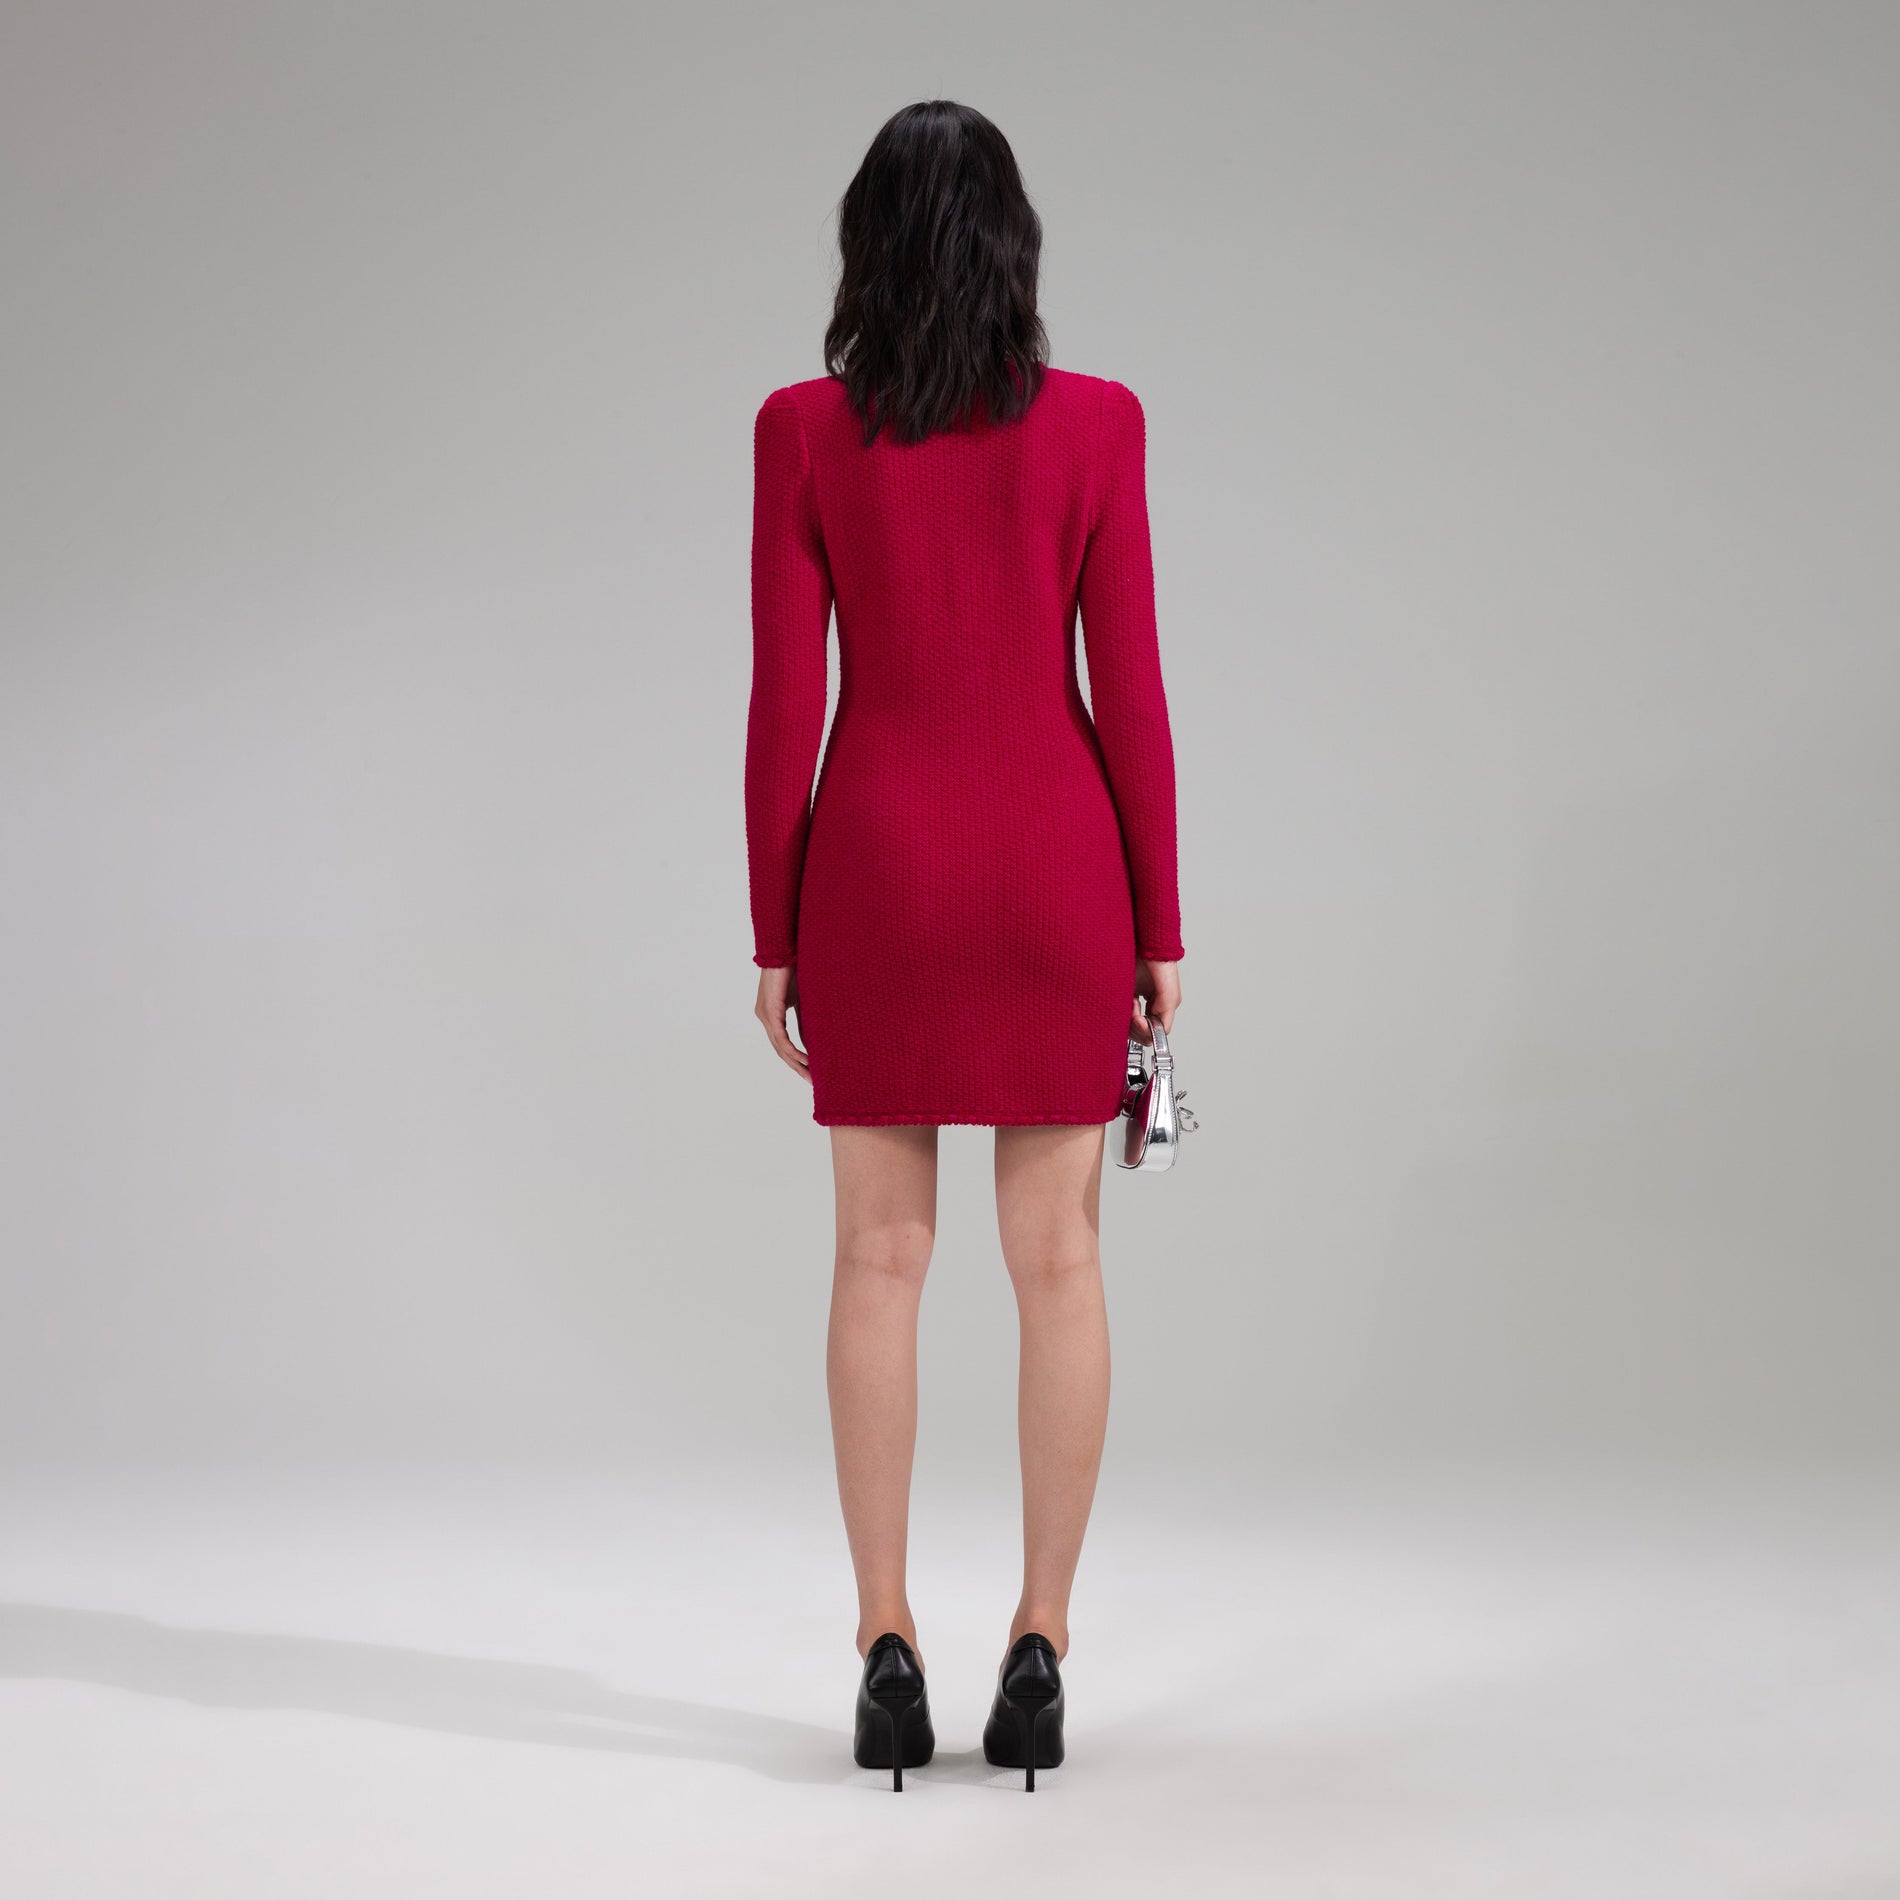 A woman wearing the Red Melange Knit Mini Bow Dress